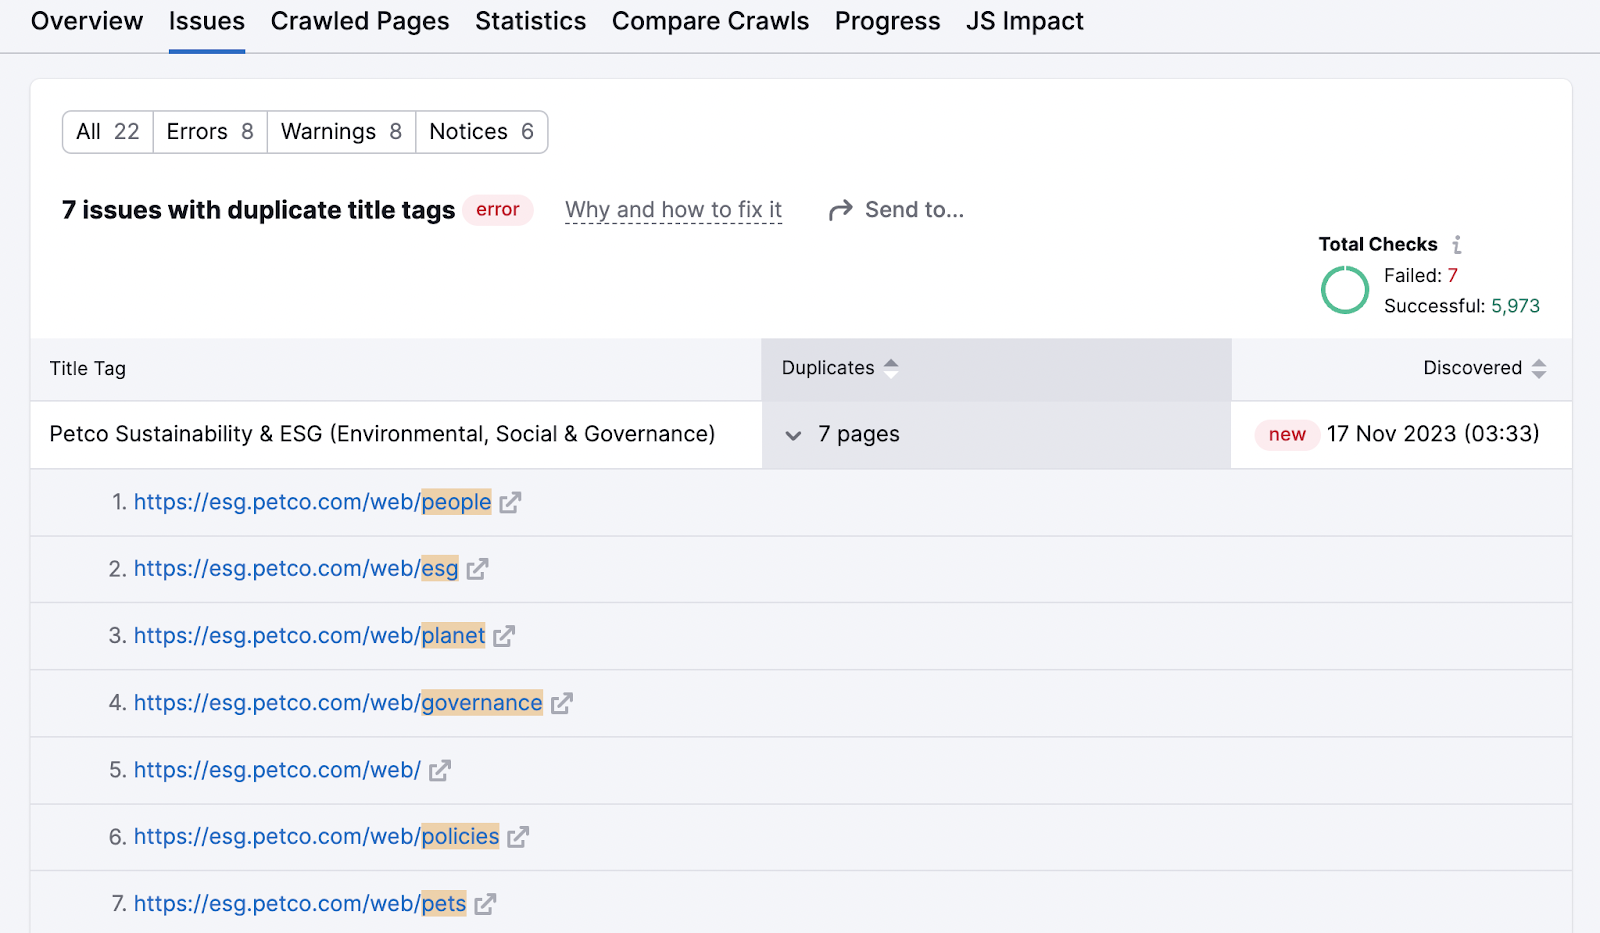 “7 issues with duplicate title tags” reports page